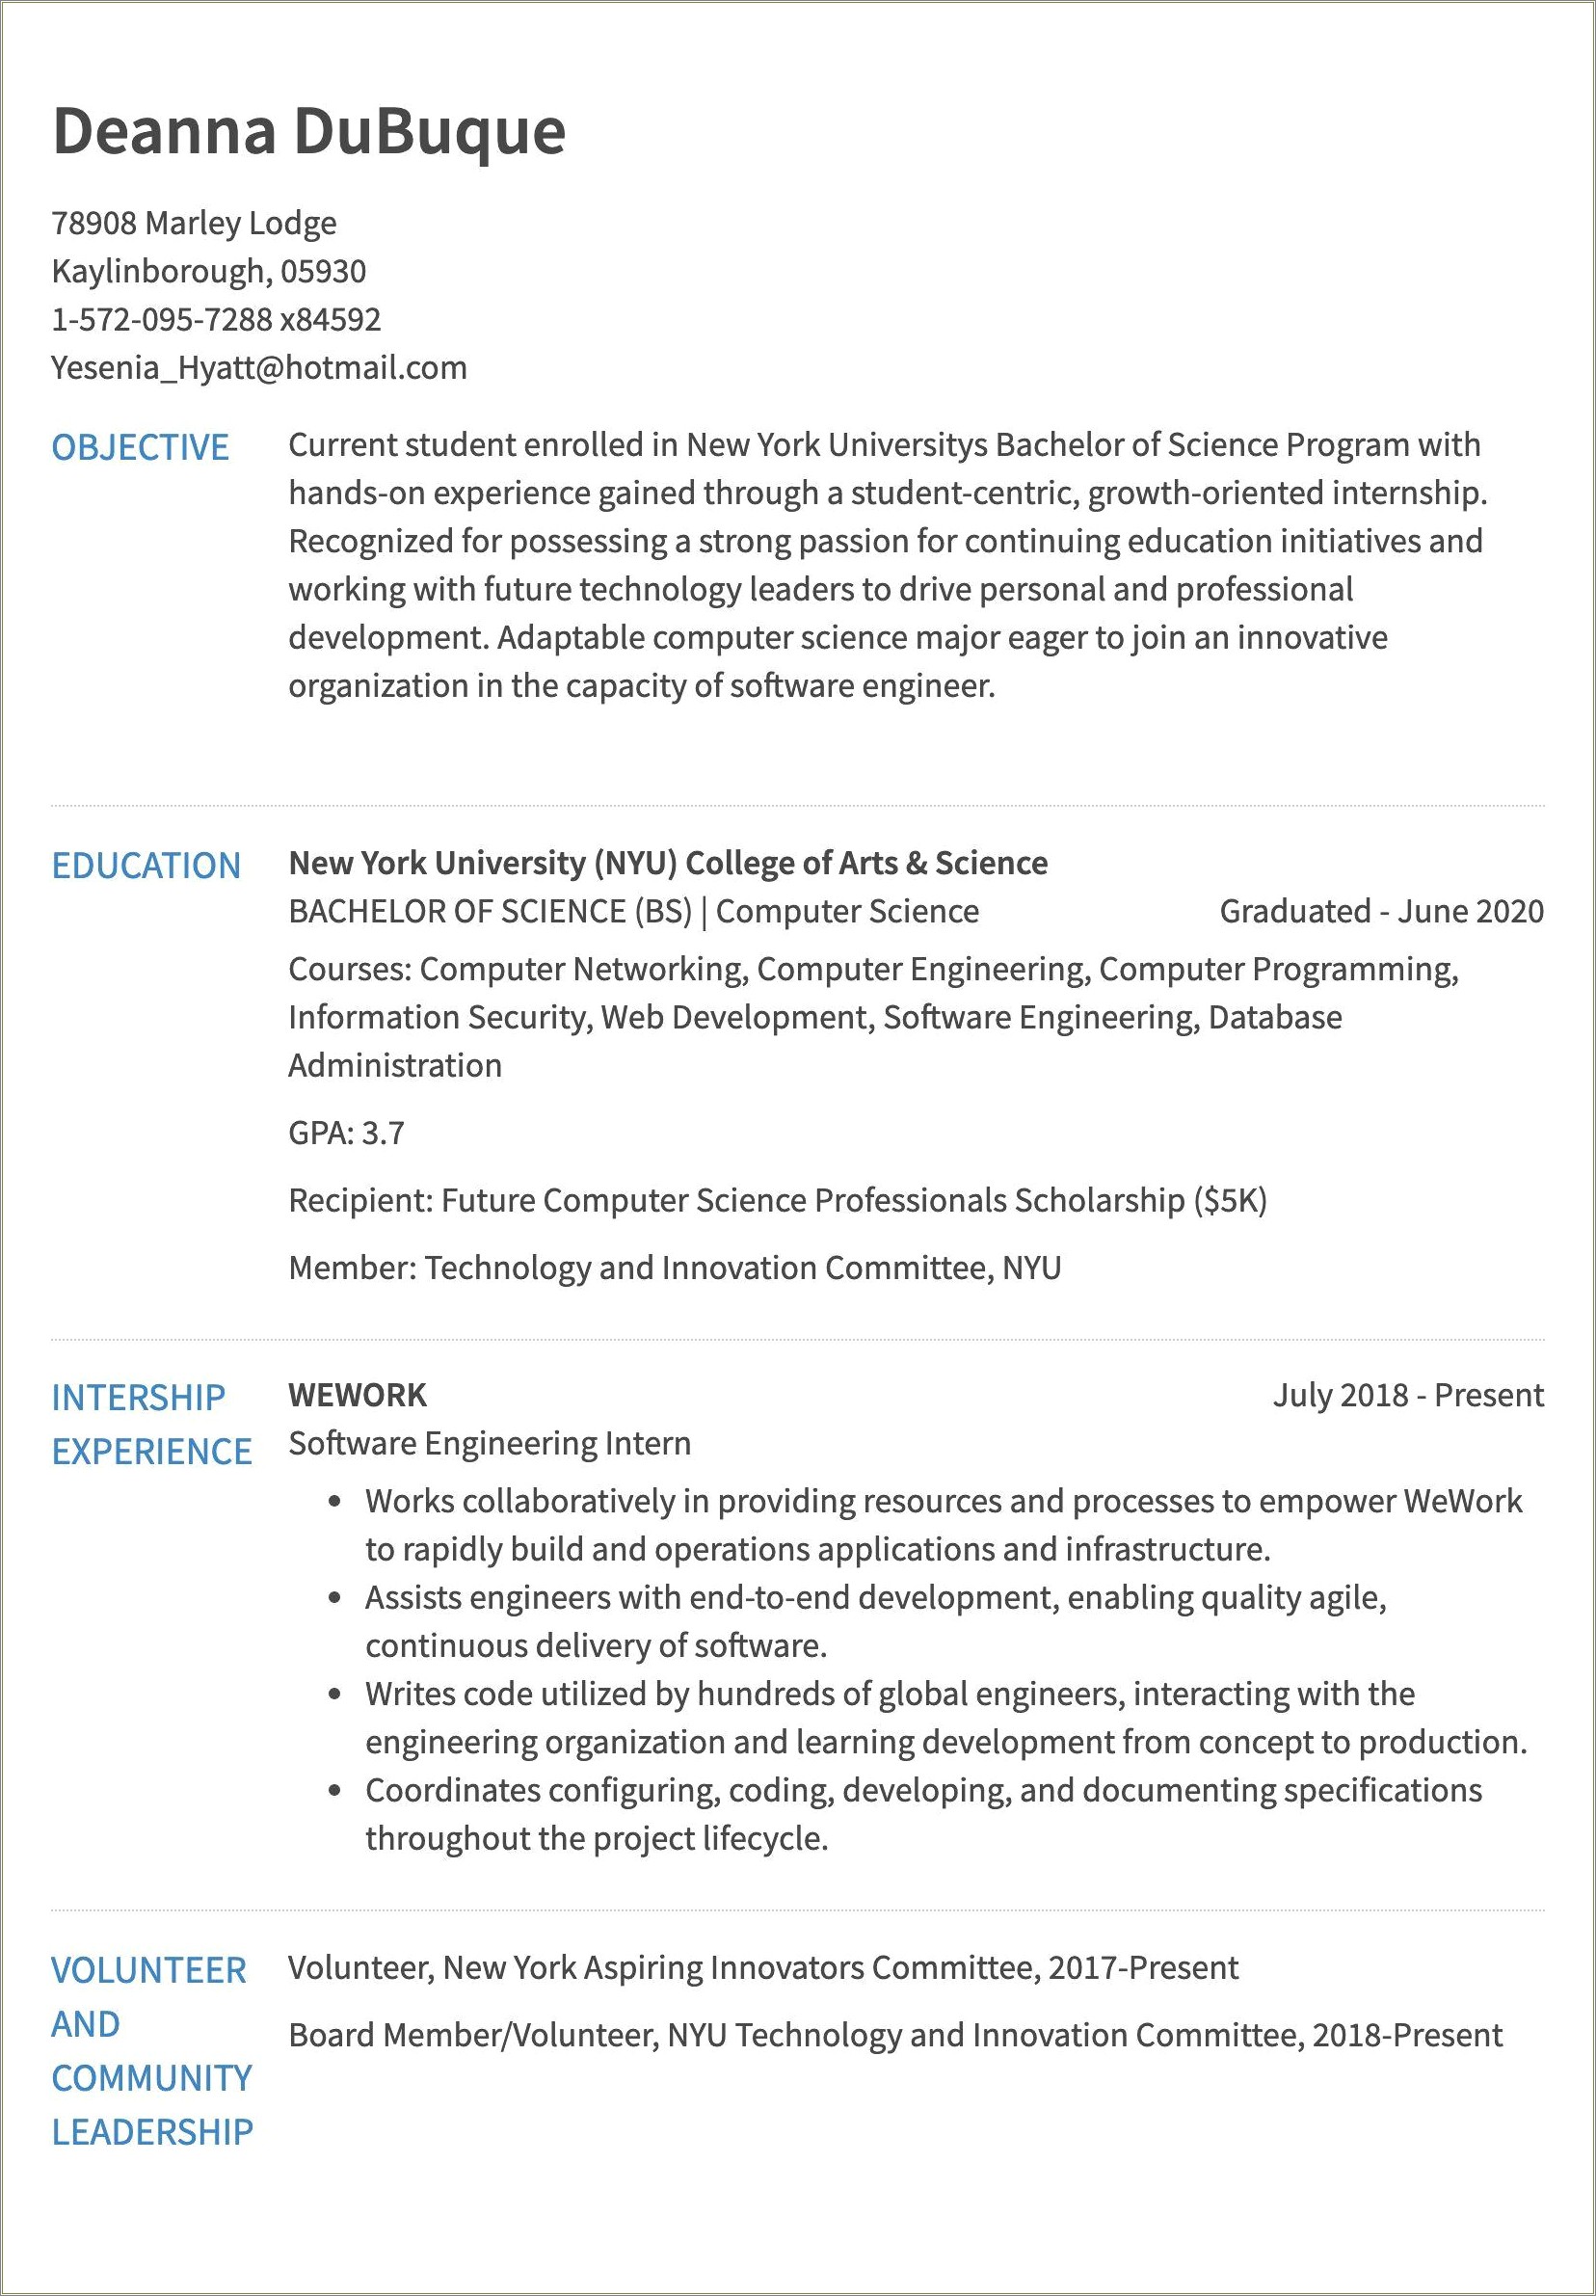 Writing A Resume Objective For Internship